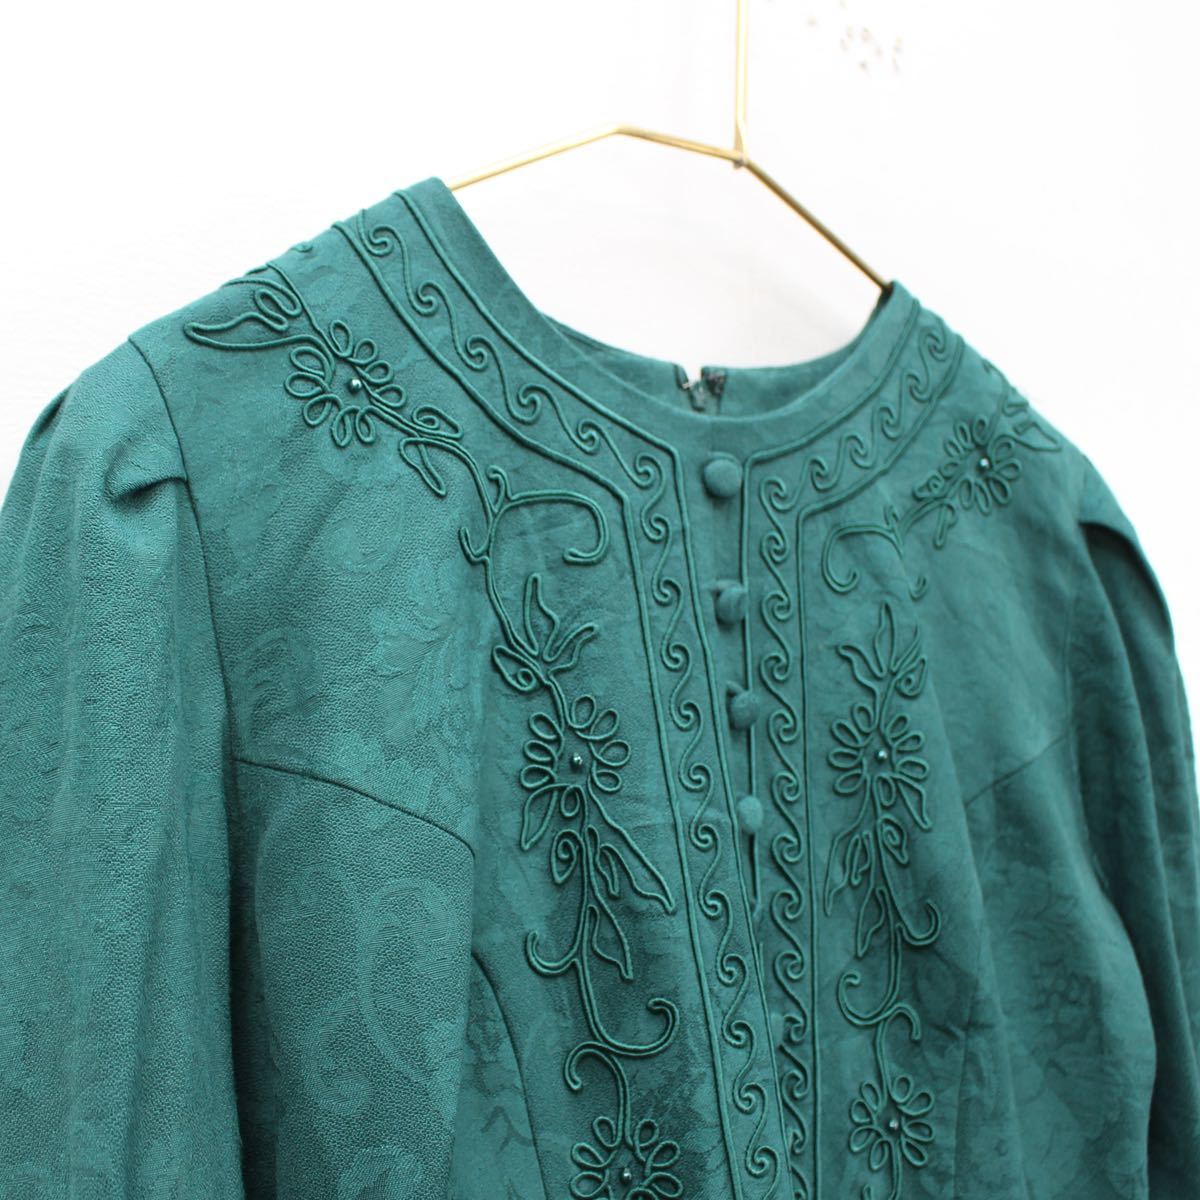 USA VINTAGE LAYARD DESIGN EMBROIDERY ONE PIECE/アメリカ古着